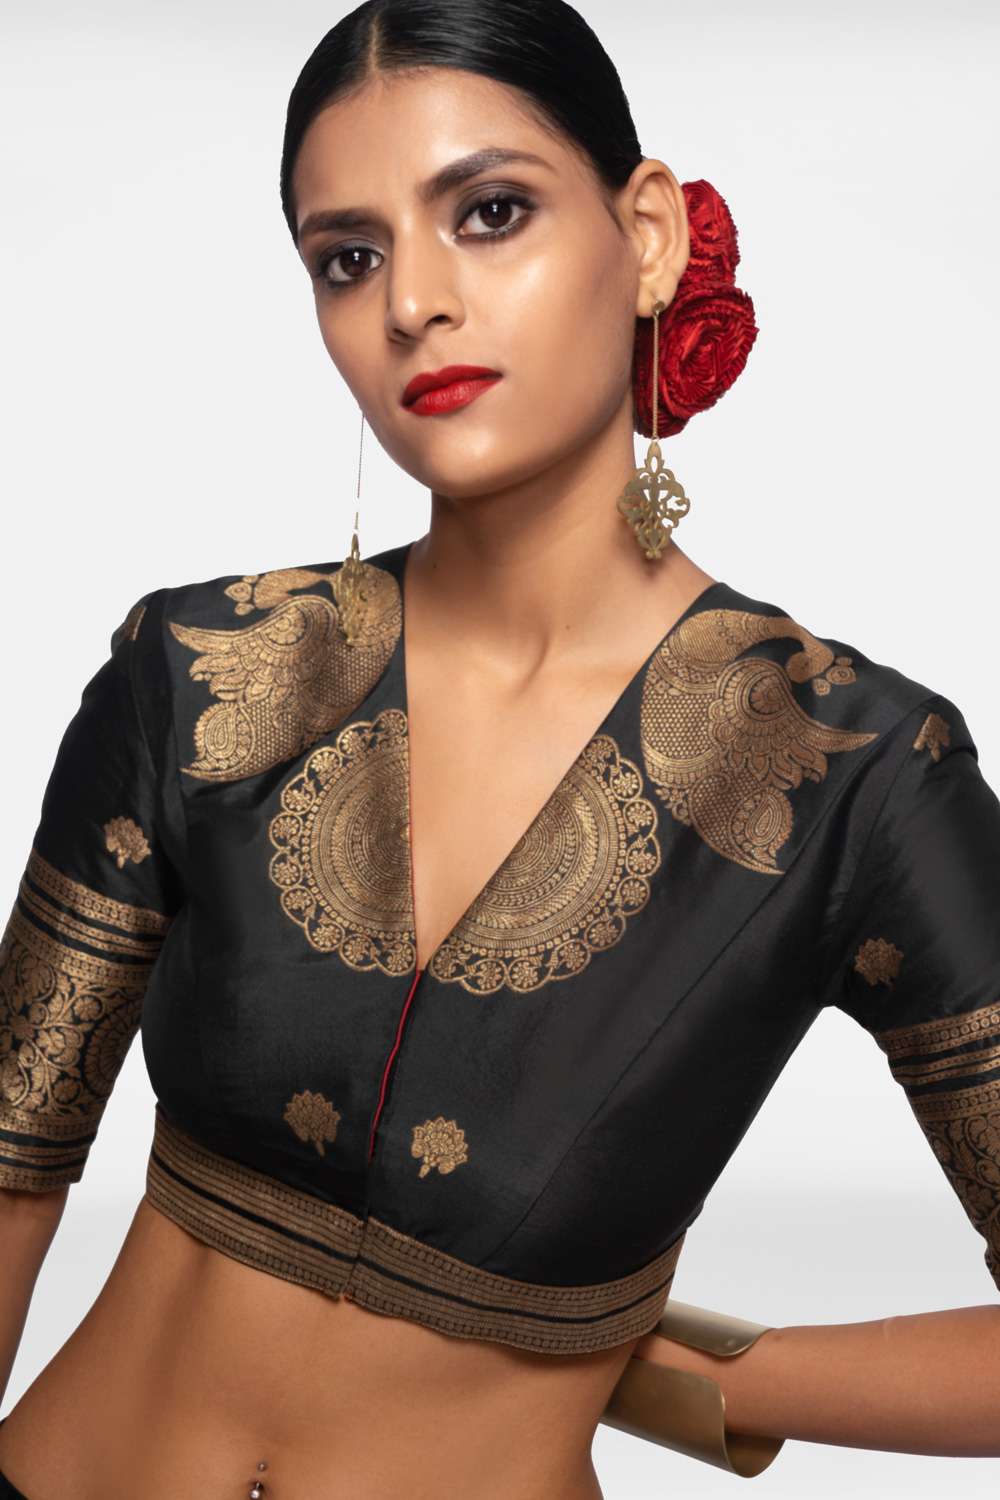 Most Fashionable Saree Blouse Designs of 2022